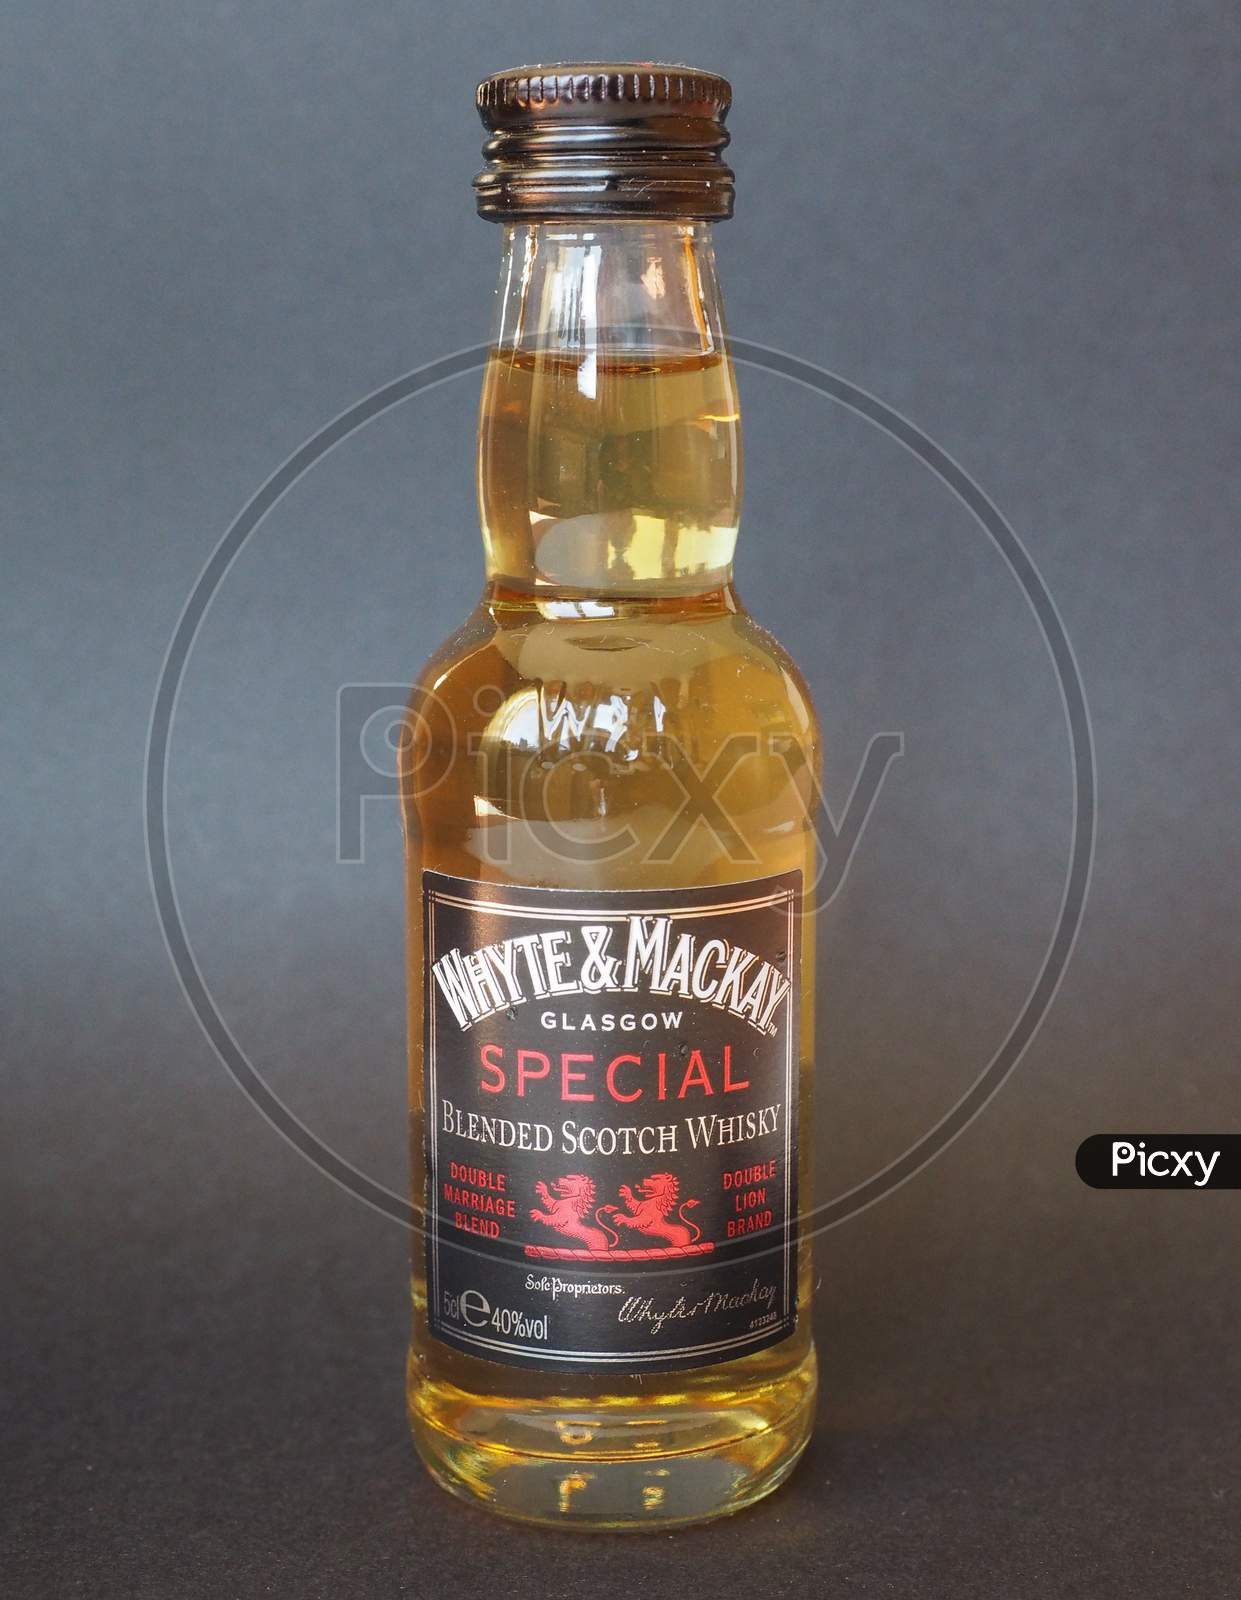 Glasgow, Scotland - January 6, 2015: Bottle Of Whyte And Mackay Special Blended Scotch Whisky